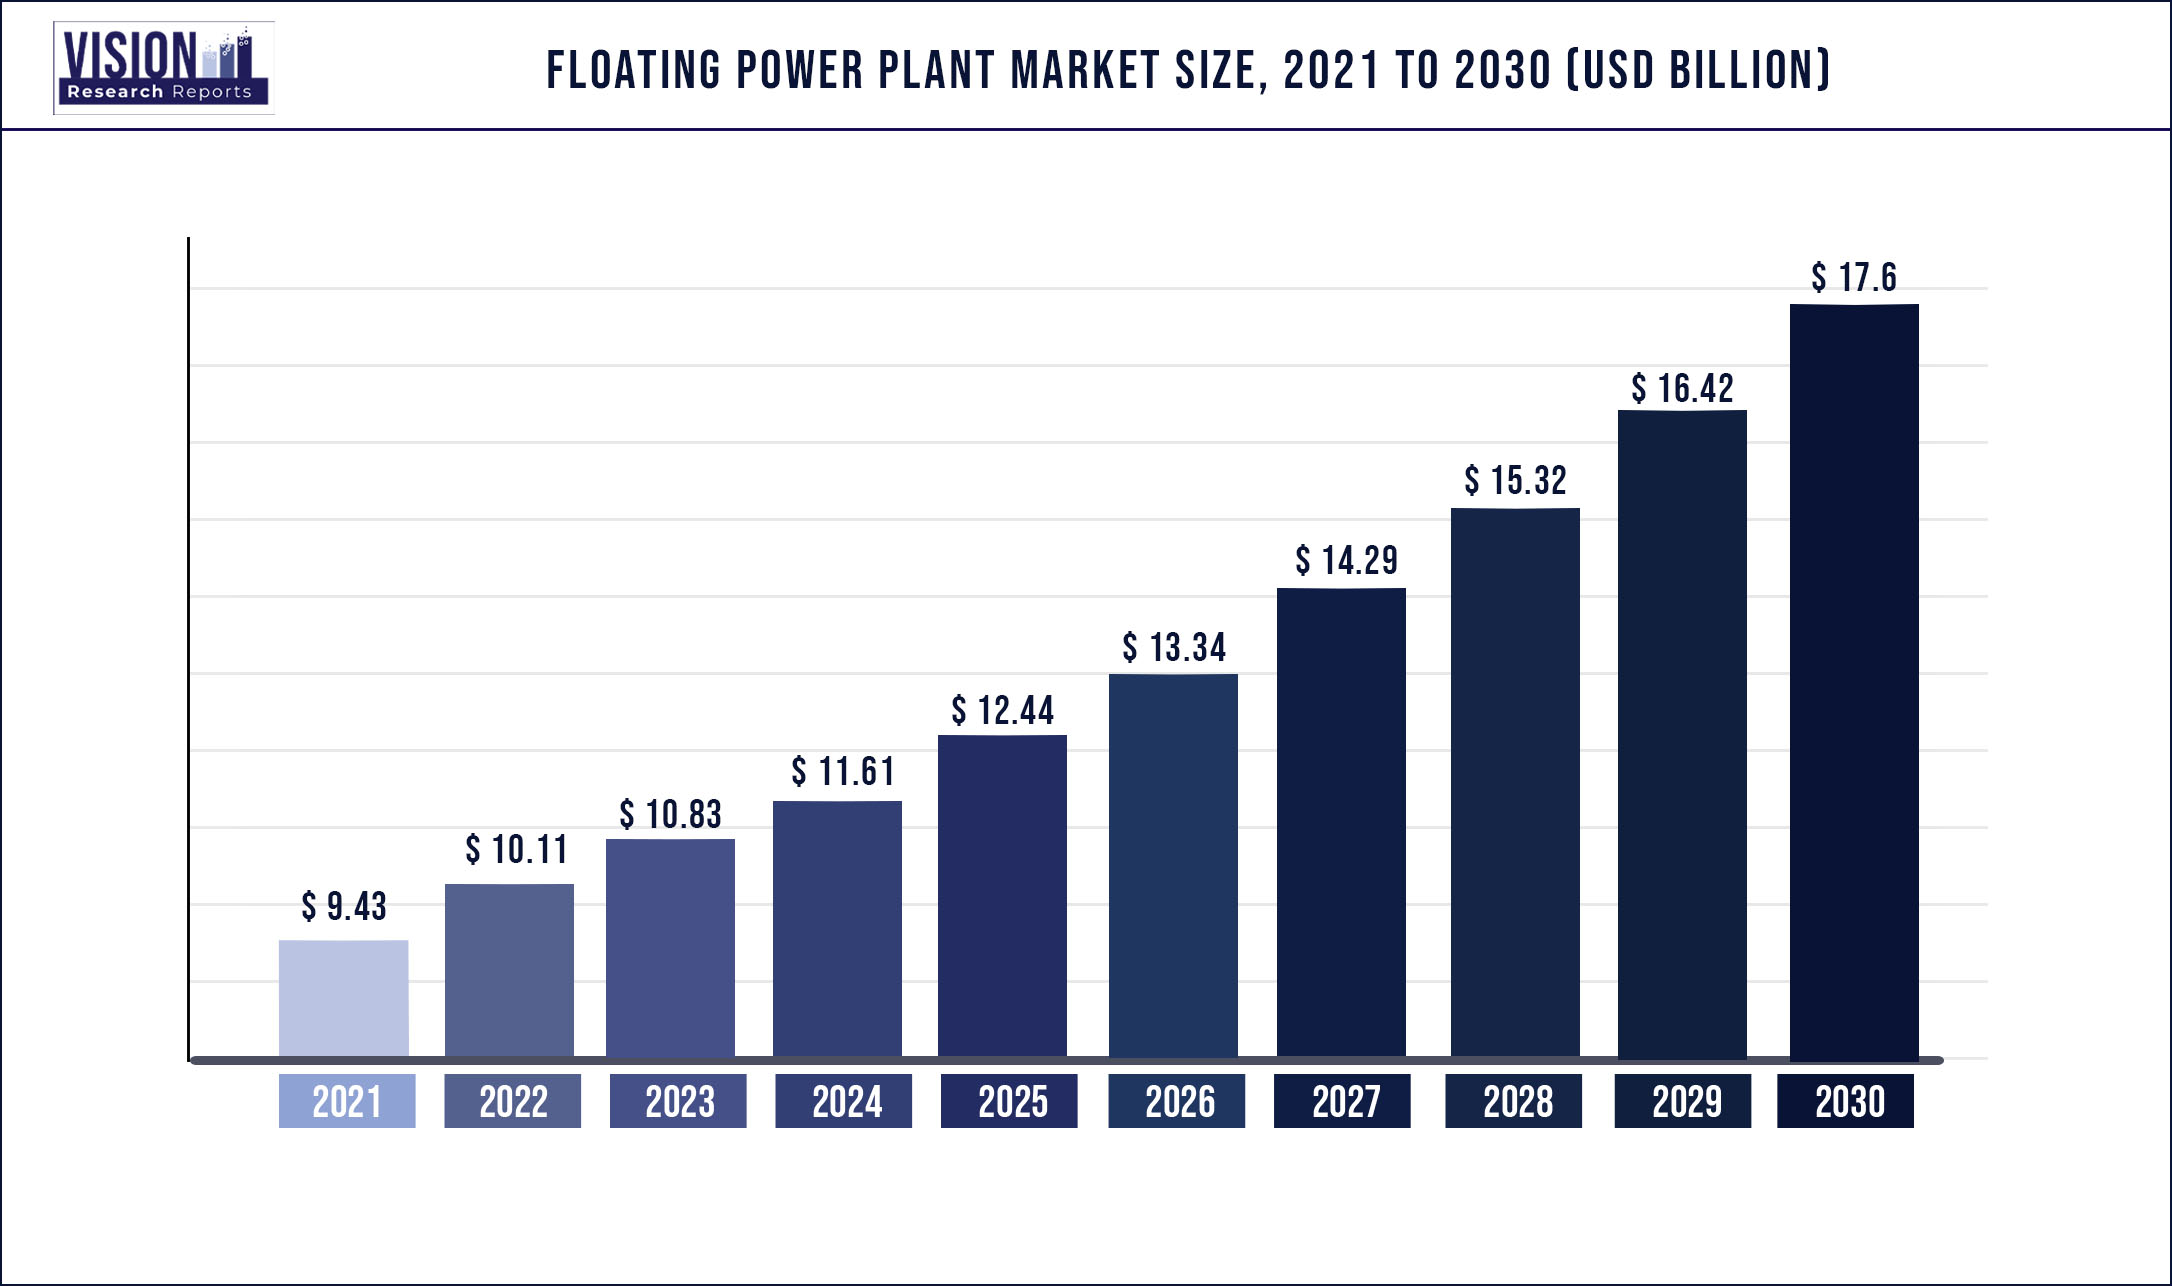 Floating Power Plant Market Size 2021 to 2030